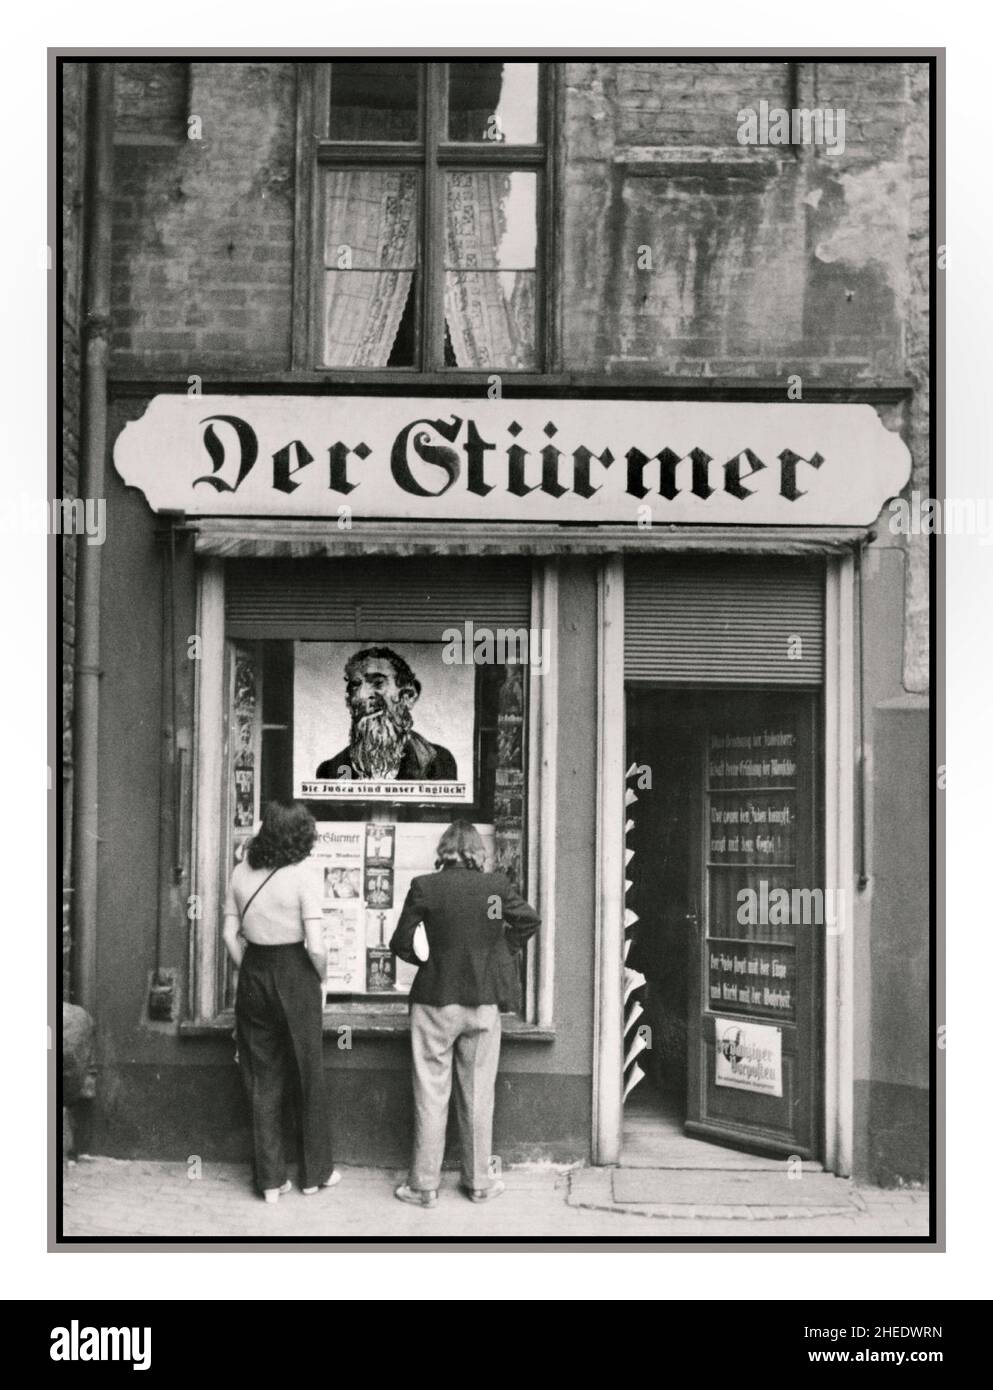 DER STURMER NSDAP Nazi Anti Jewish Racist Propaganda Newspaper outlet offices of Nazi newspaper DER STURMER Gdansk in Poland, 1930s. An anti-Semitic poster displayed in the window reads 'Die Juden sind unser Ungluck!' ('The Jews are our misfortune'  Der Stürmer Tabloid Newspaper Weekly German newspaper published by Julius Streicher, the Gauleiter of Franconia, from 1923 to the end of World War II Nuremberg Nazi Germany During WW2 Streicher regularly authorized articles demanding annihilation and extermination of the Jewish race. Der Stürmer was best known for its anti-semitic caricatures, Stock Photo